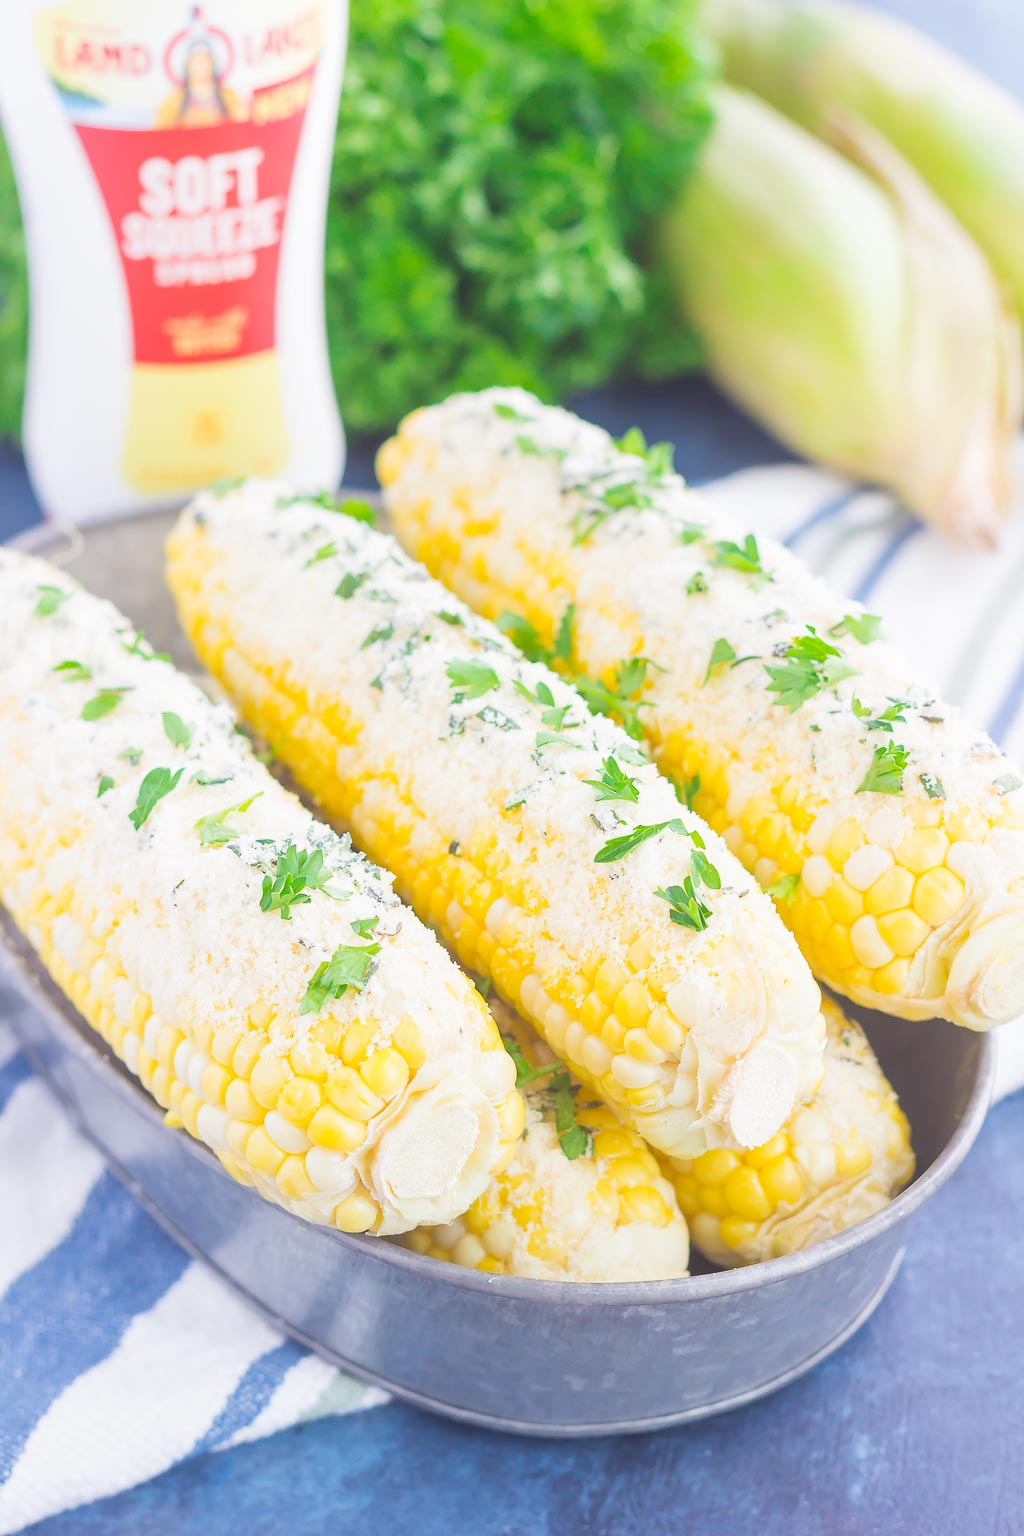 This Parmesan Herb Corn on the Cob is an easy side dish that's loaded with flavor. A buttery spread of Parmesan, garlic and herbs top fresh corn that's roasted to perfection! #corn #cornonthecob #parmesan #parmesancorn #cornrecipe #cornonthecobrecipe #sidedish #easysidedish